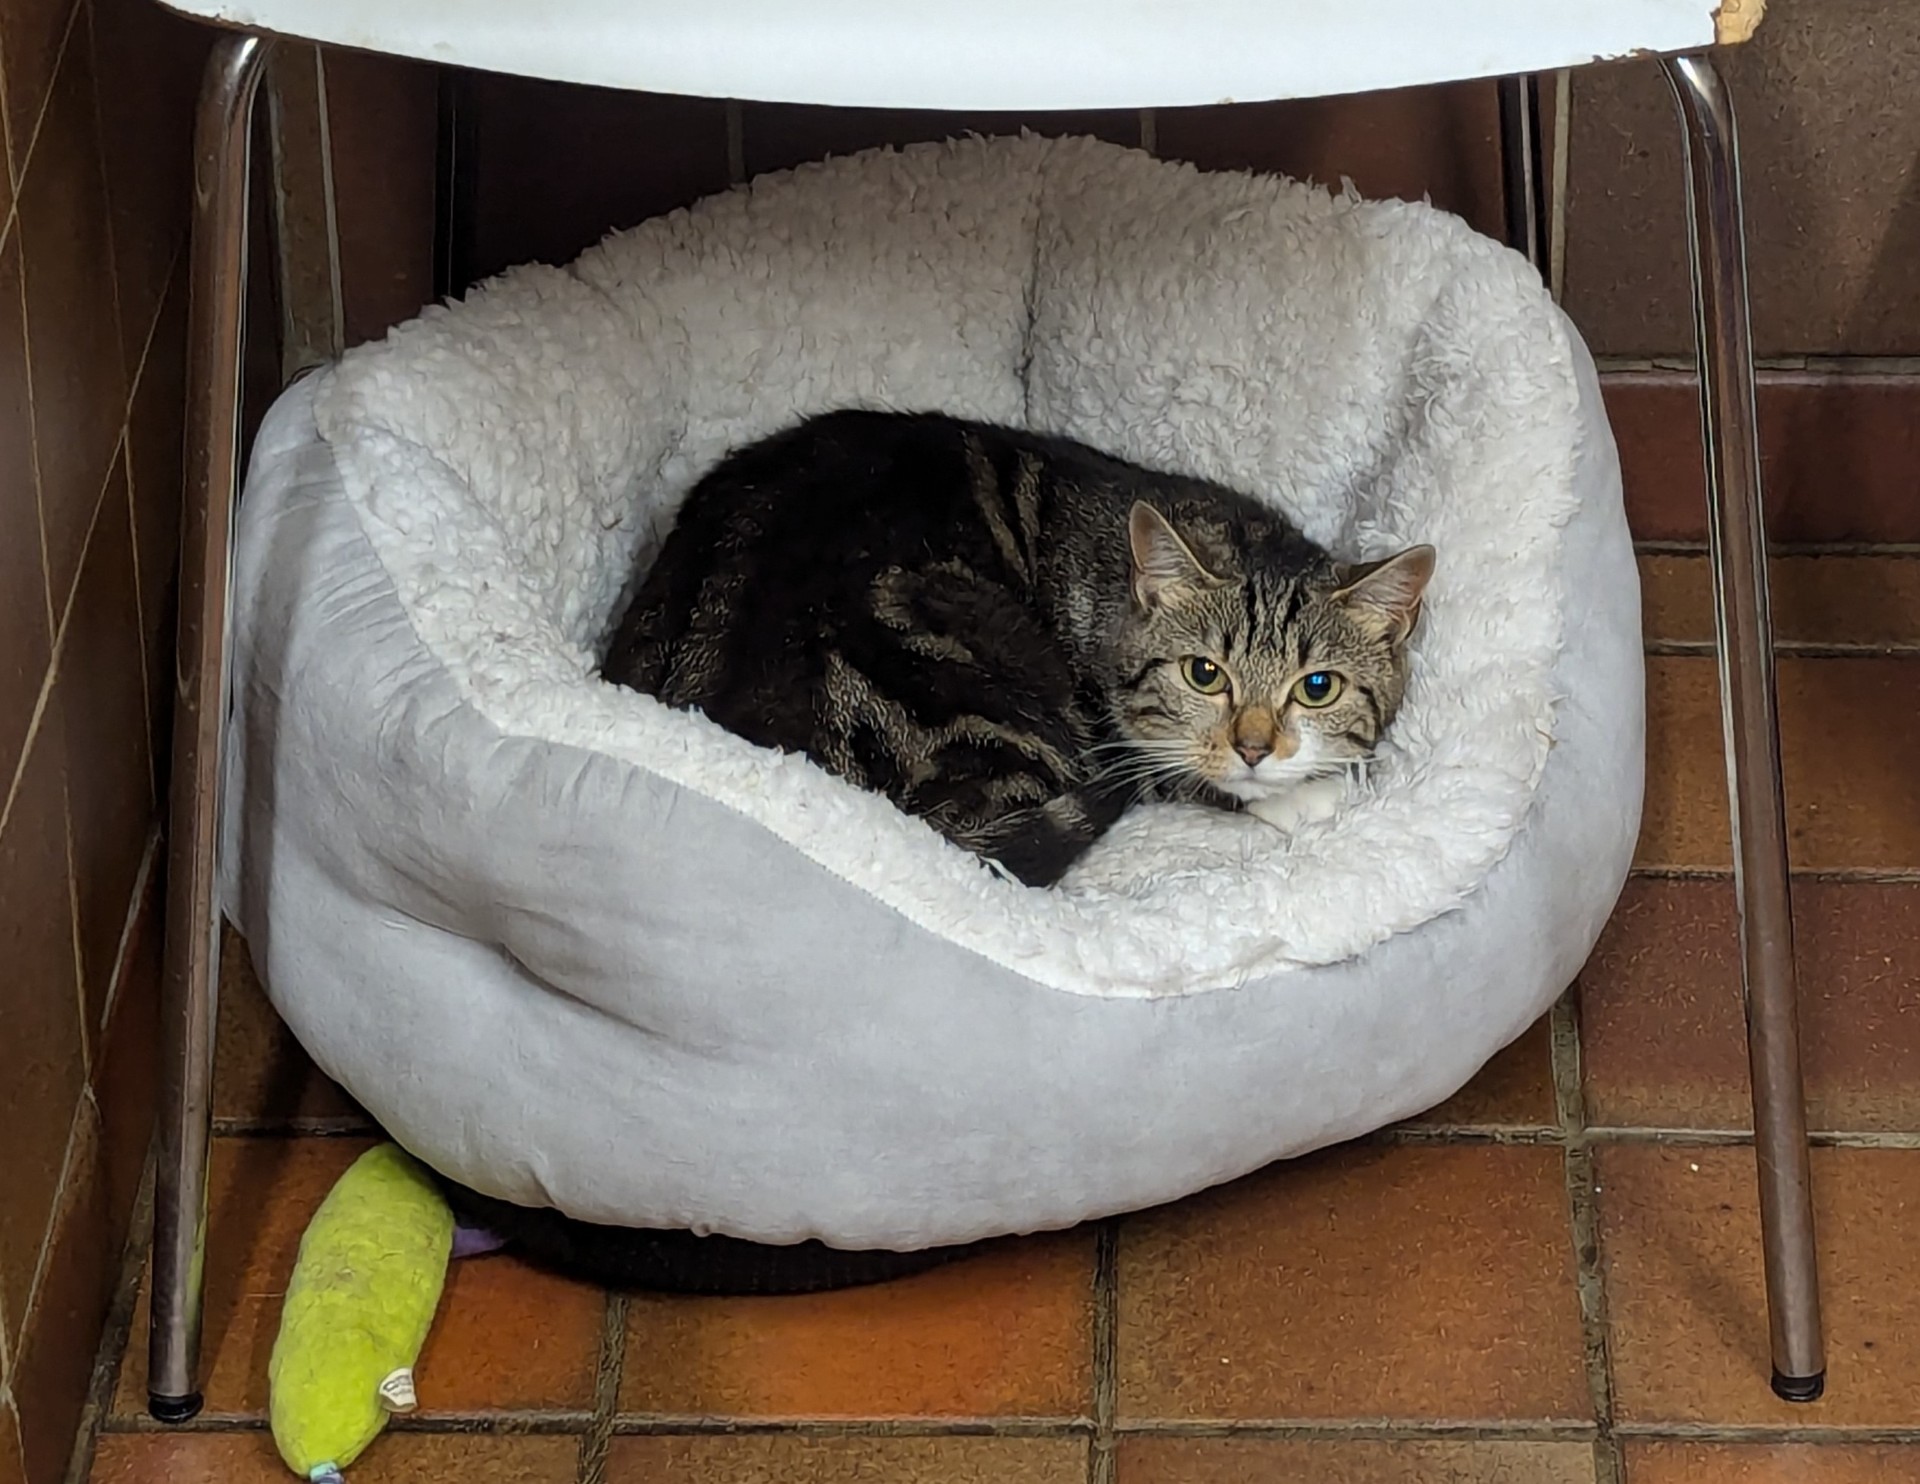 New cat listed for rescue at the Borders Pet Rescue - Maisy